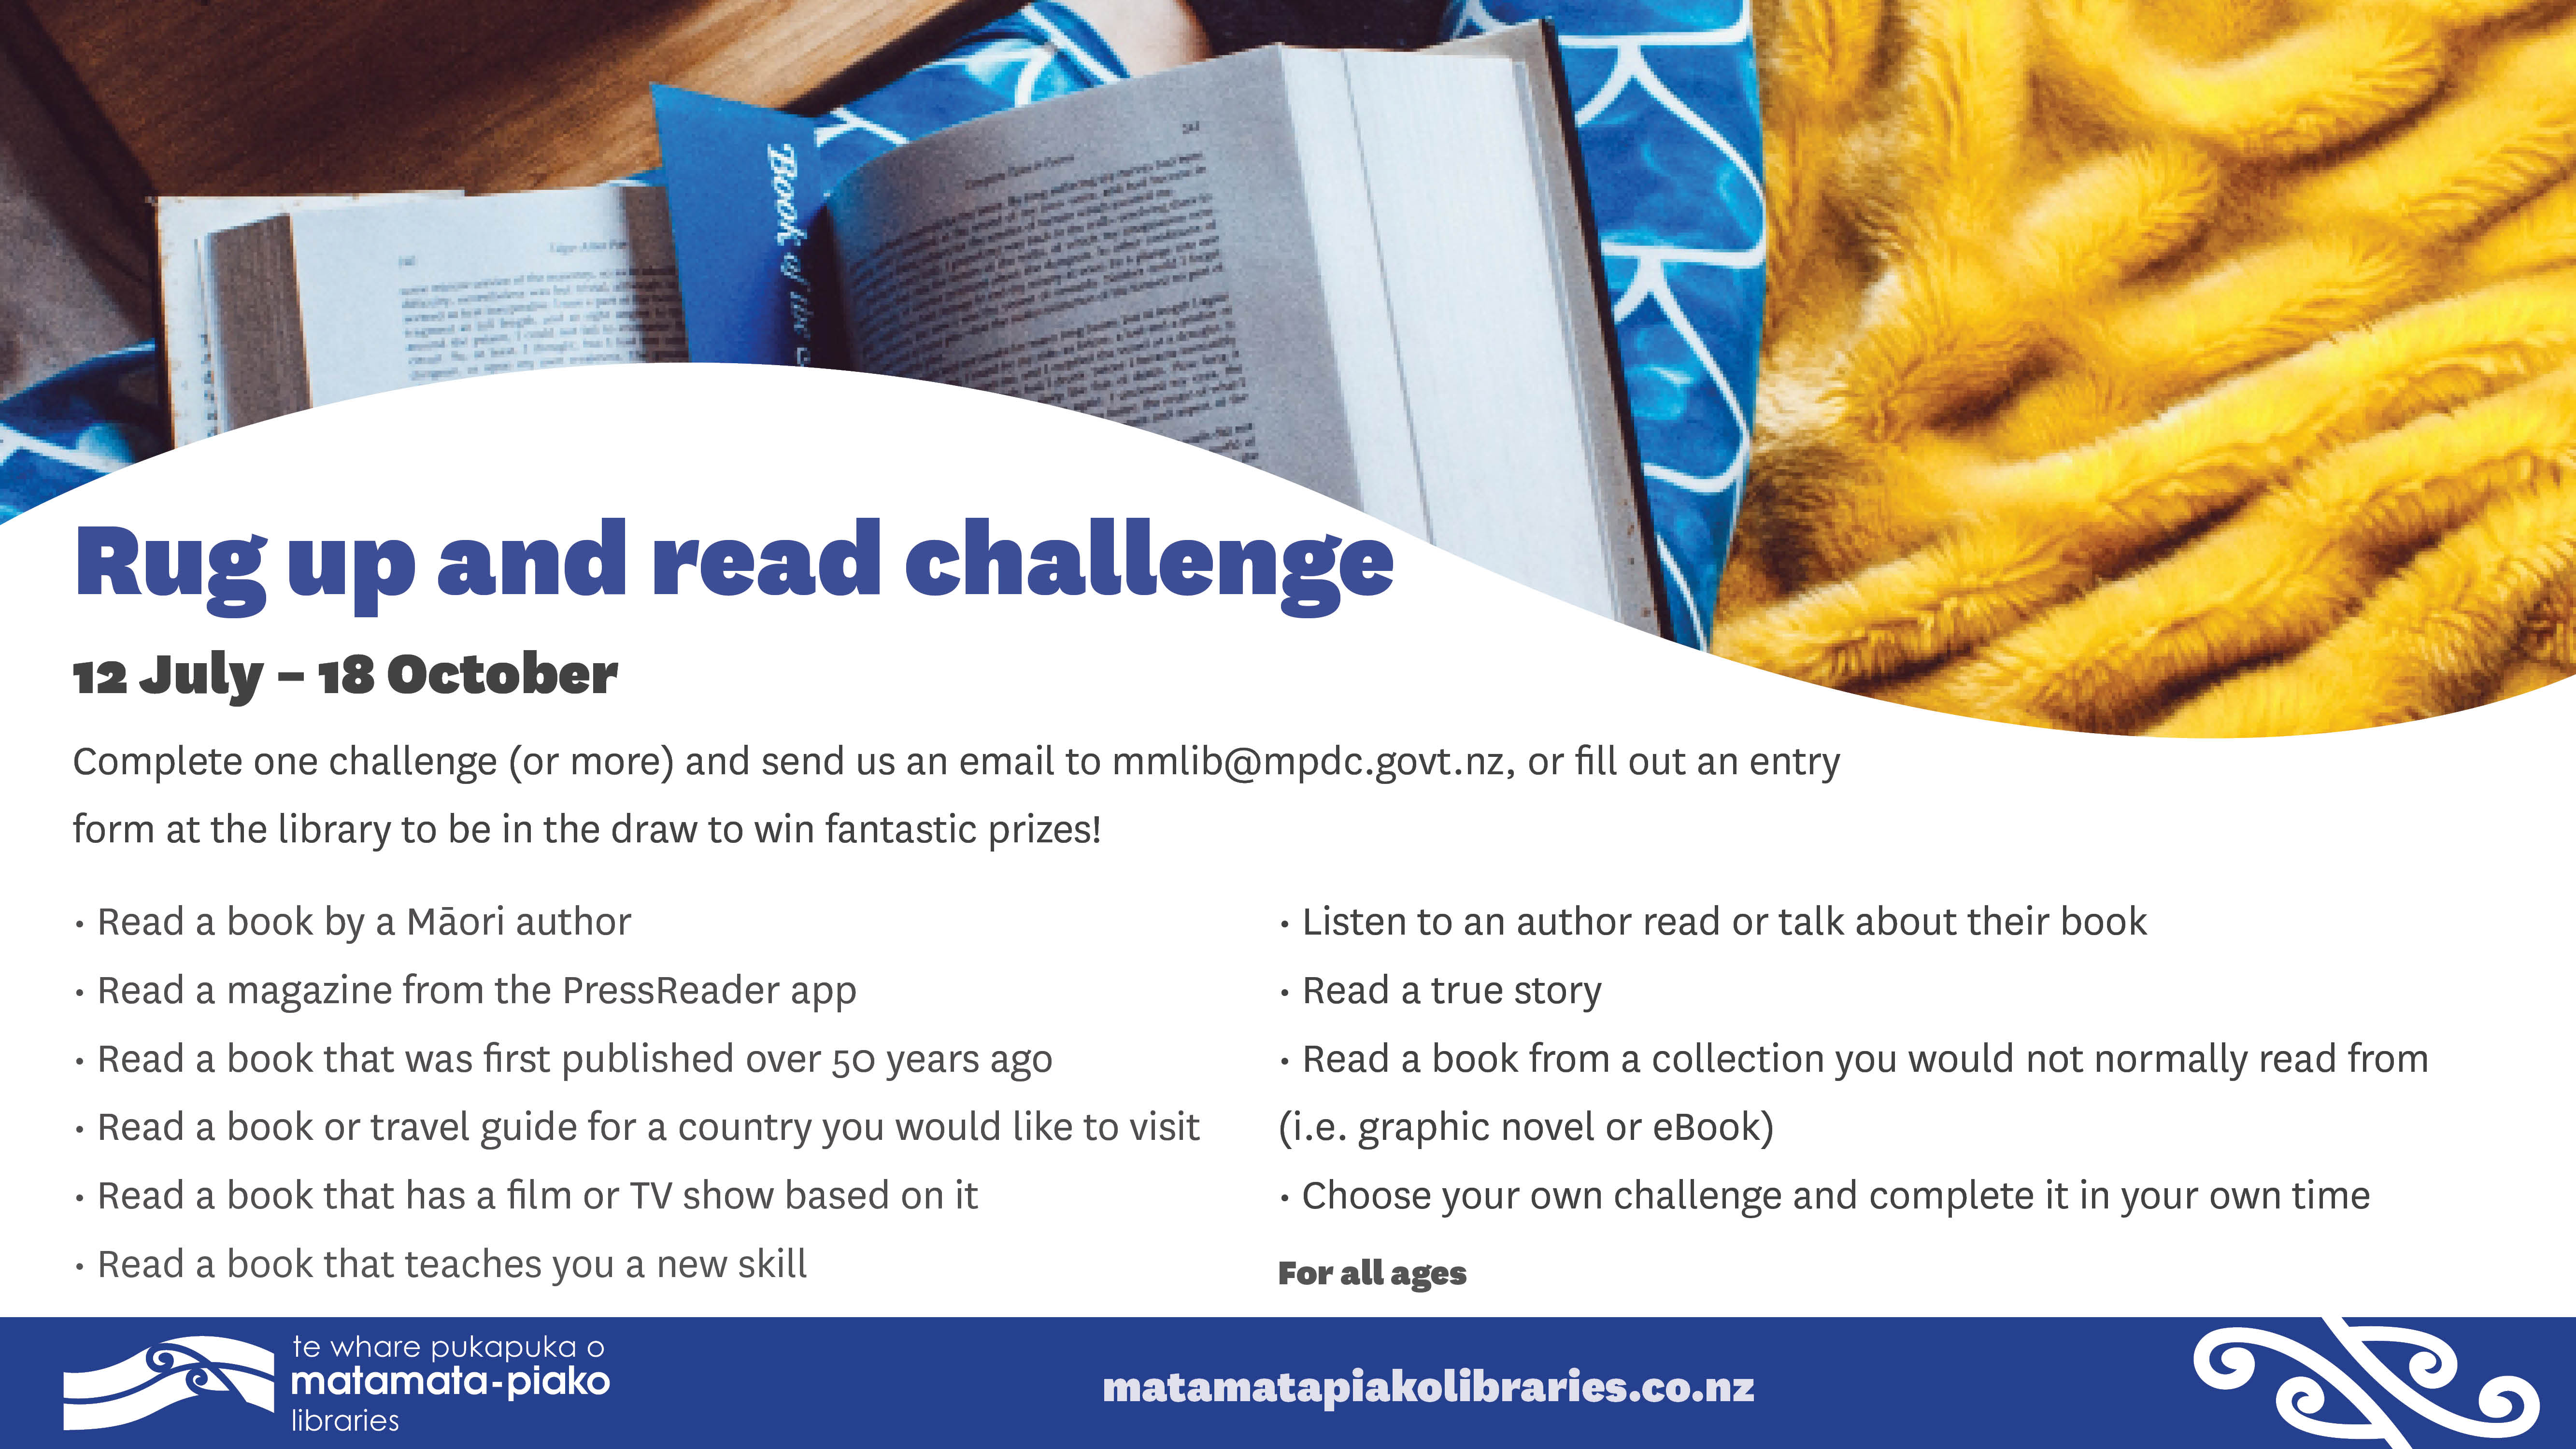 Rug up and read challenge - Read a book by a Māori author